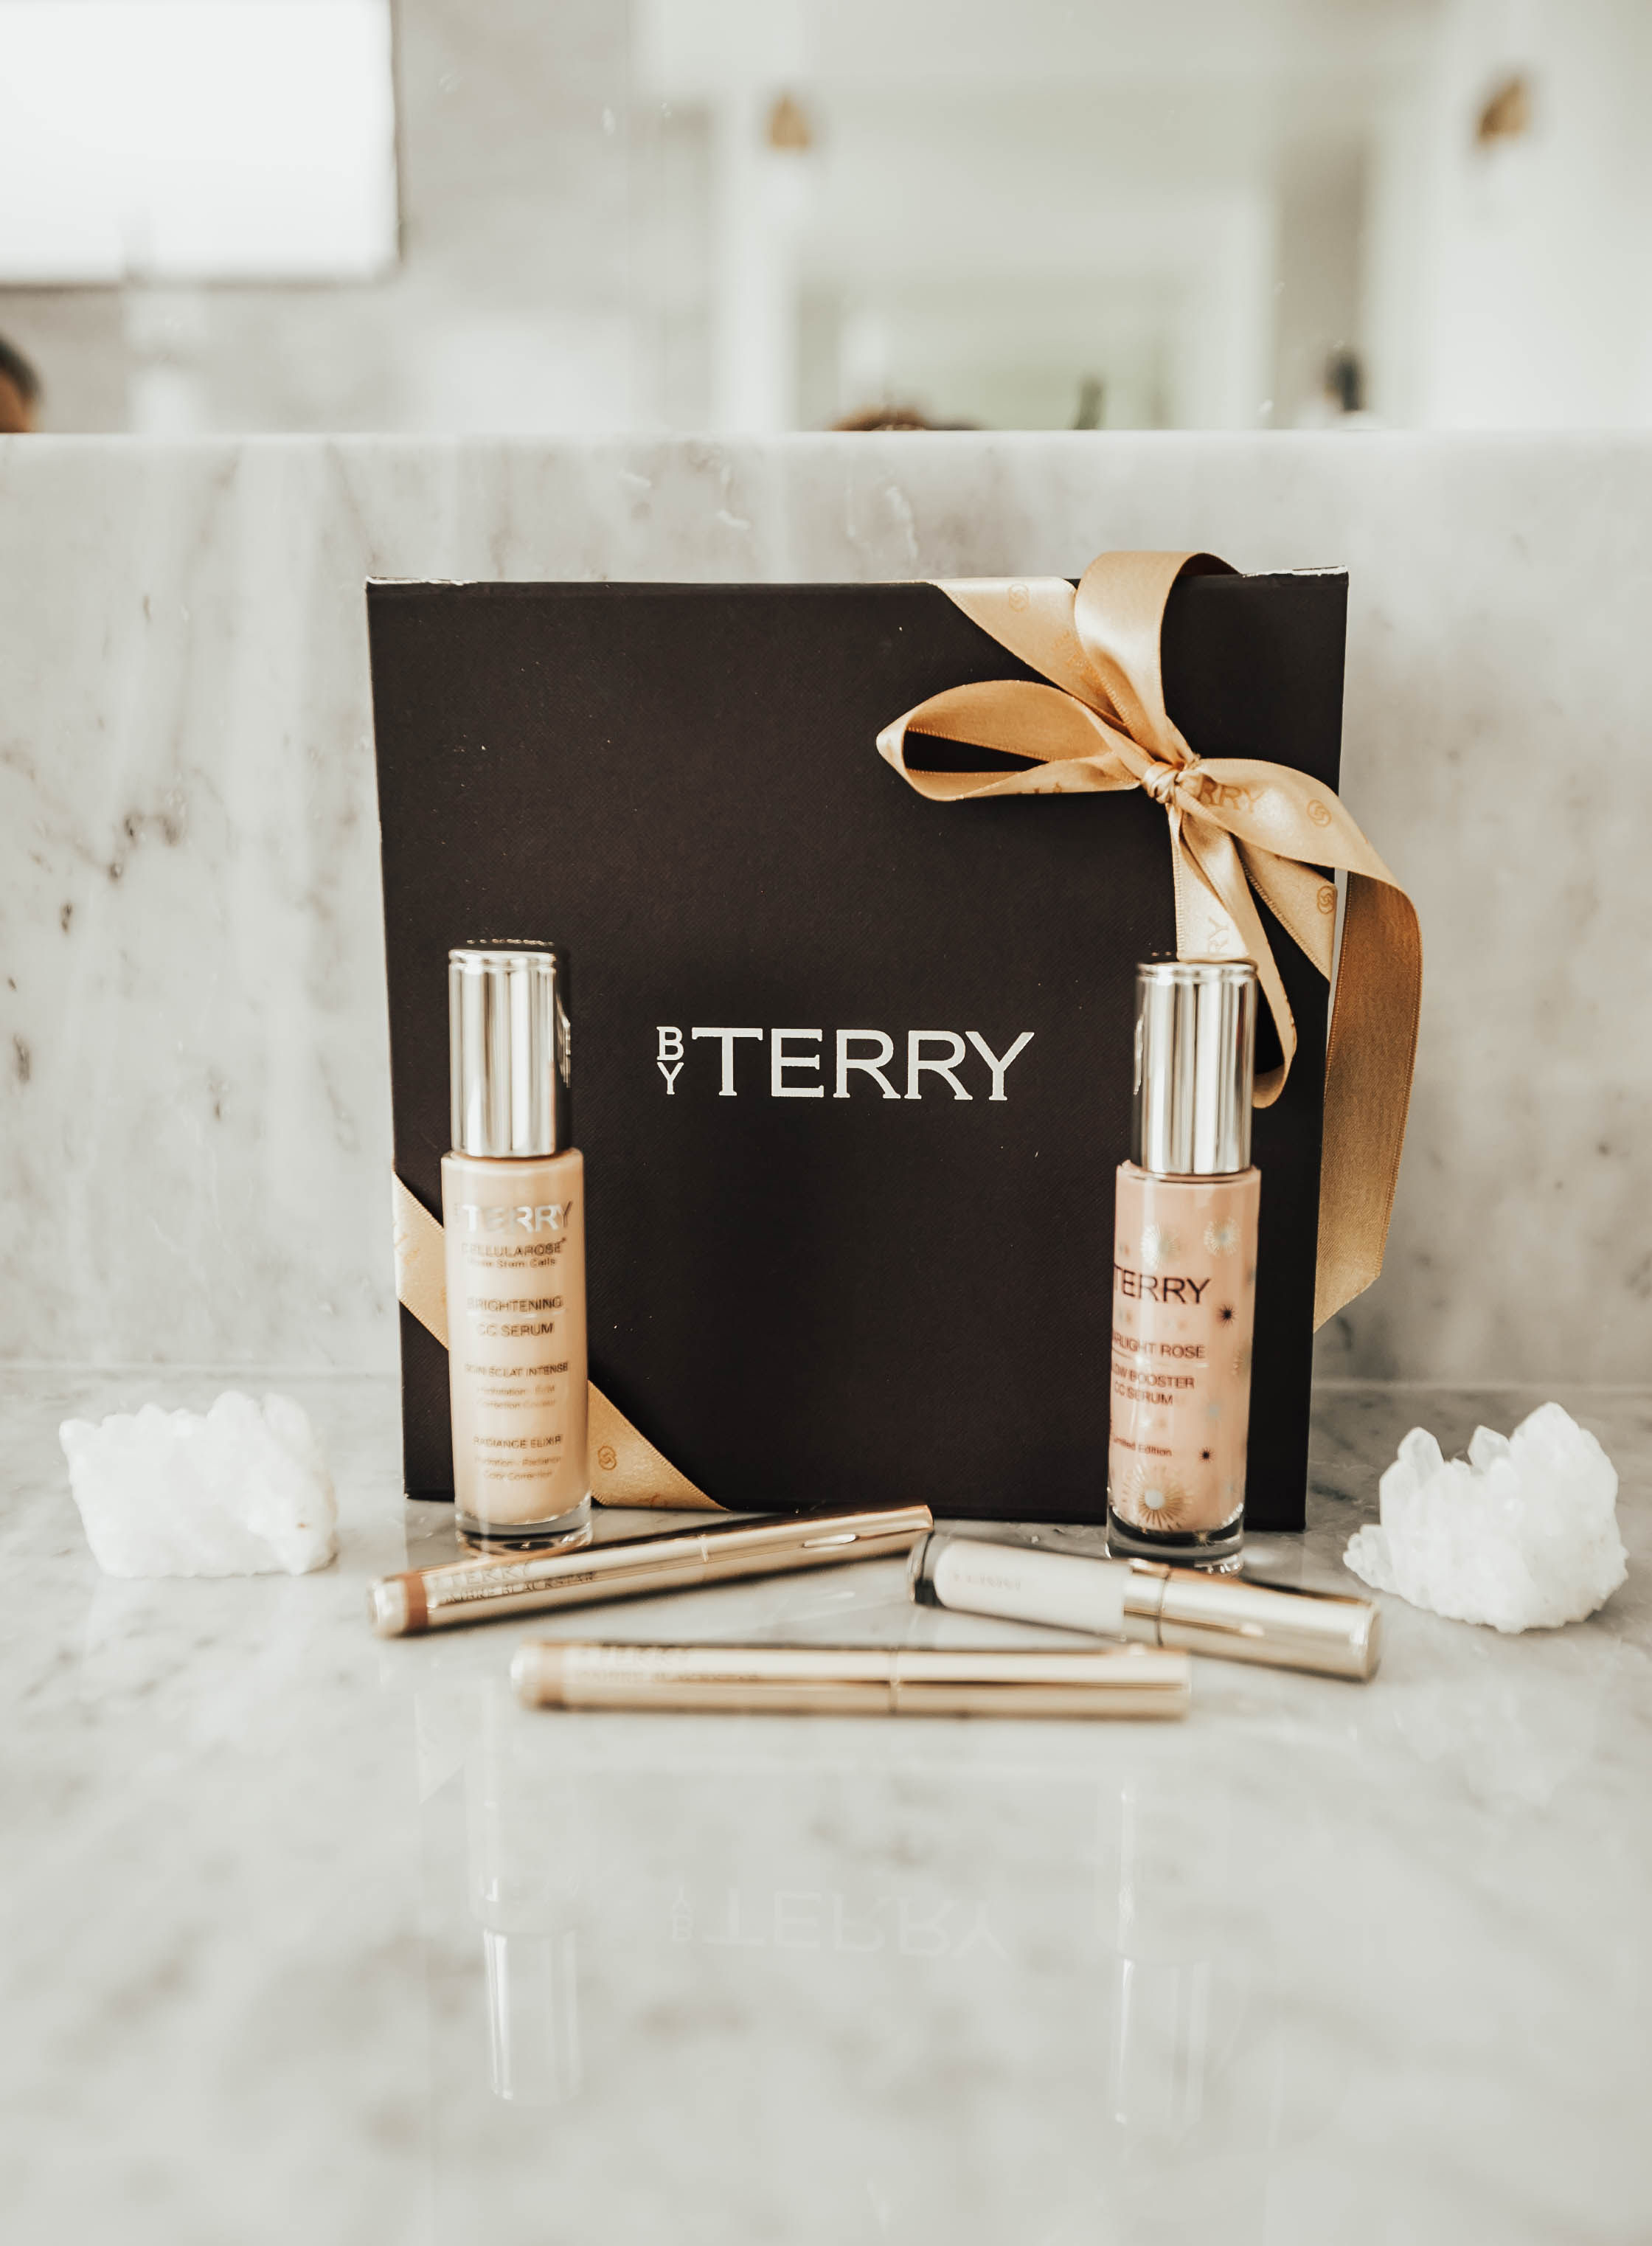 Reno blogger Ashley Zeal from Two Peas in a Prada shares how she gets that winter glow under her makeup using By Terry products,